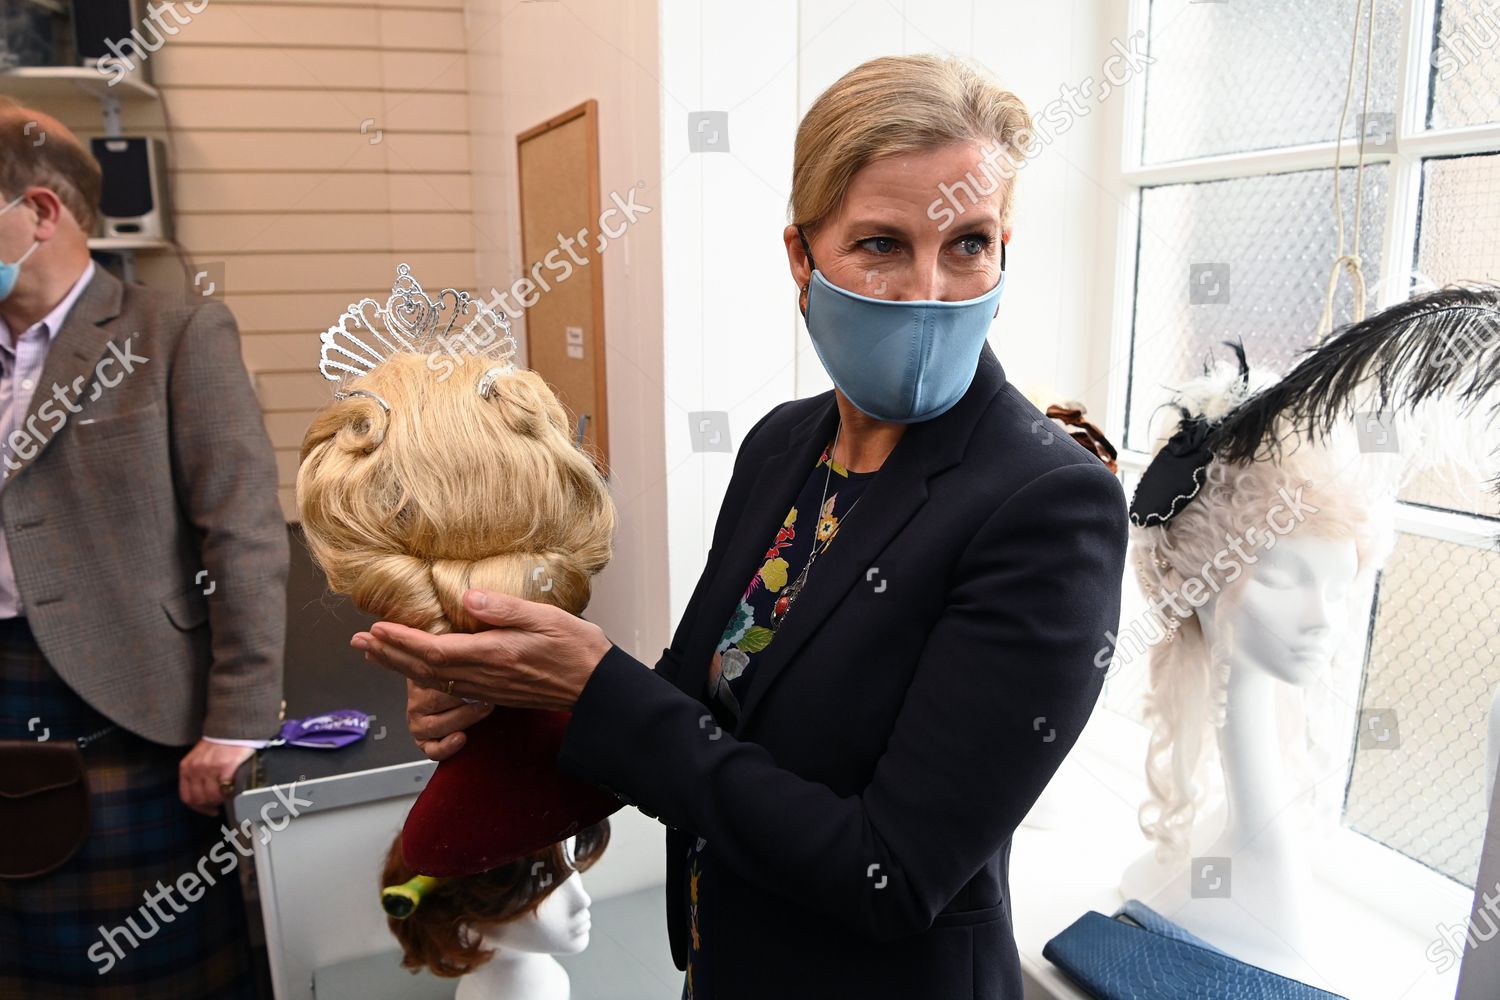 CASA REAL BRITÁNICA - Página 75 Prince-edward-and-sophie-countess-of-wessex-visit-to-utopia-costumes-forfar-scotland-uk-shutterstock-editorial-12172309p